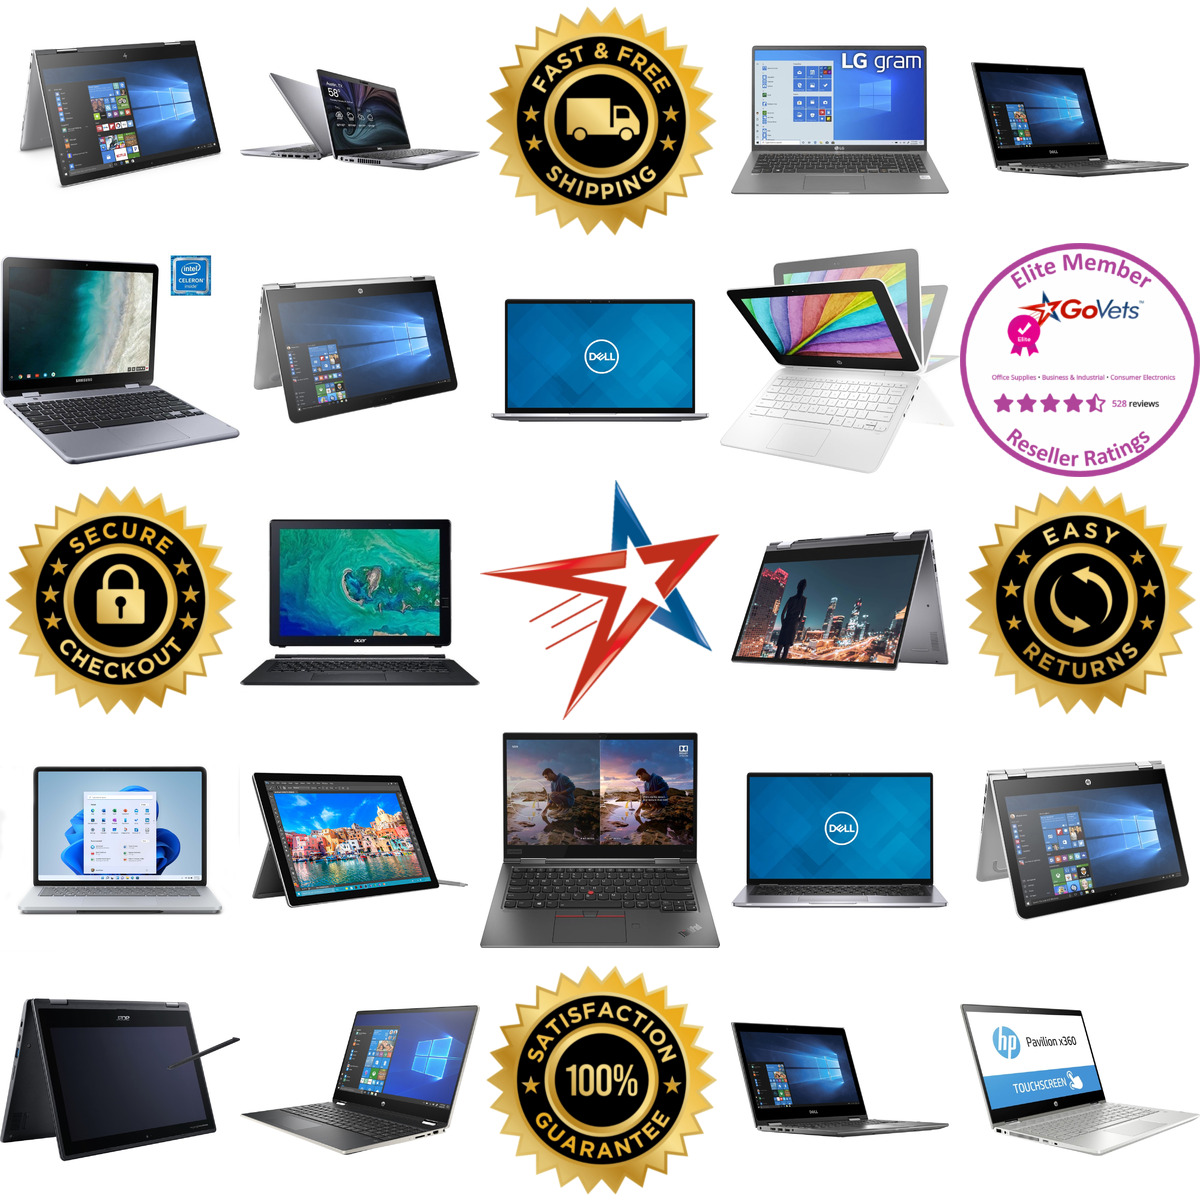 A selection of 2 in 1 Laptops products on GoVets